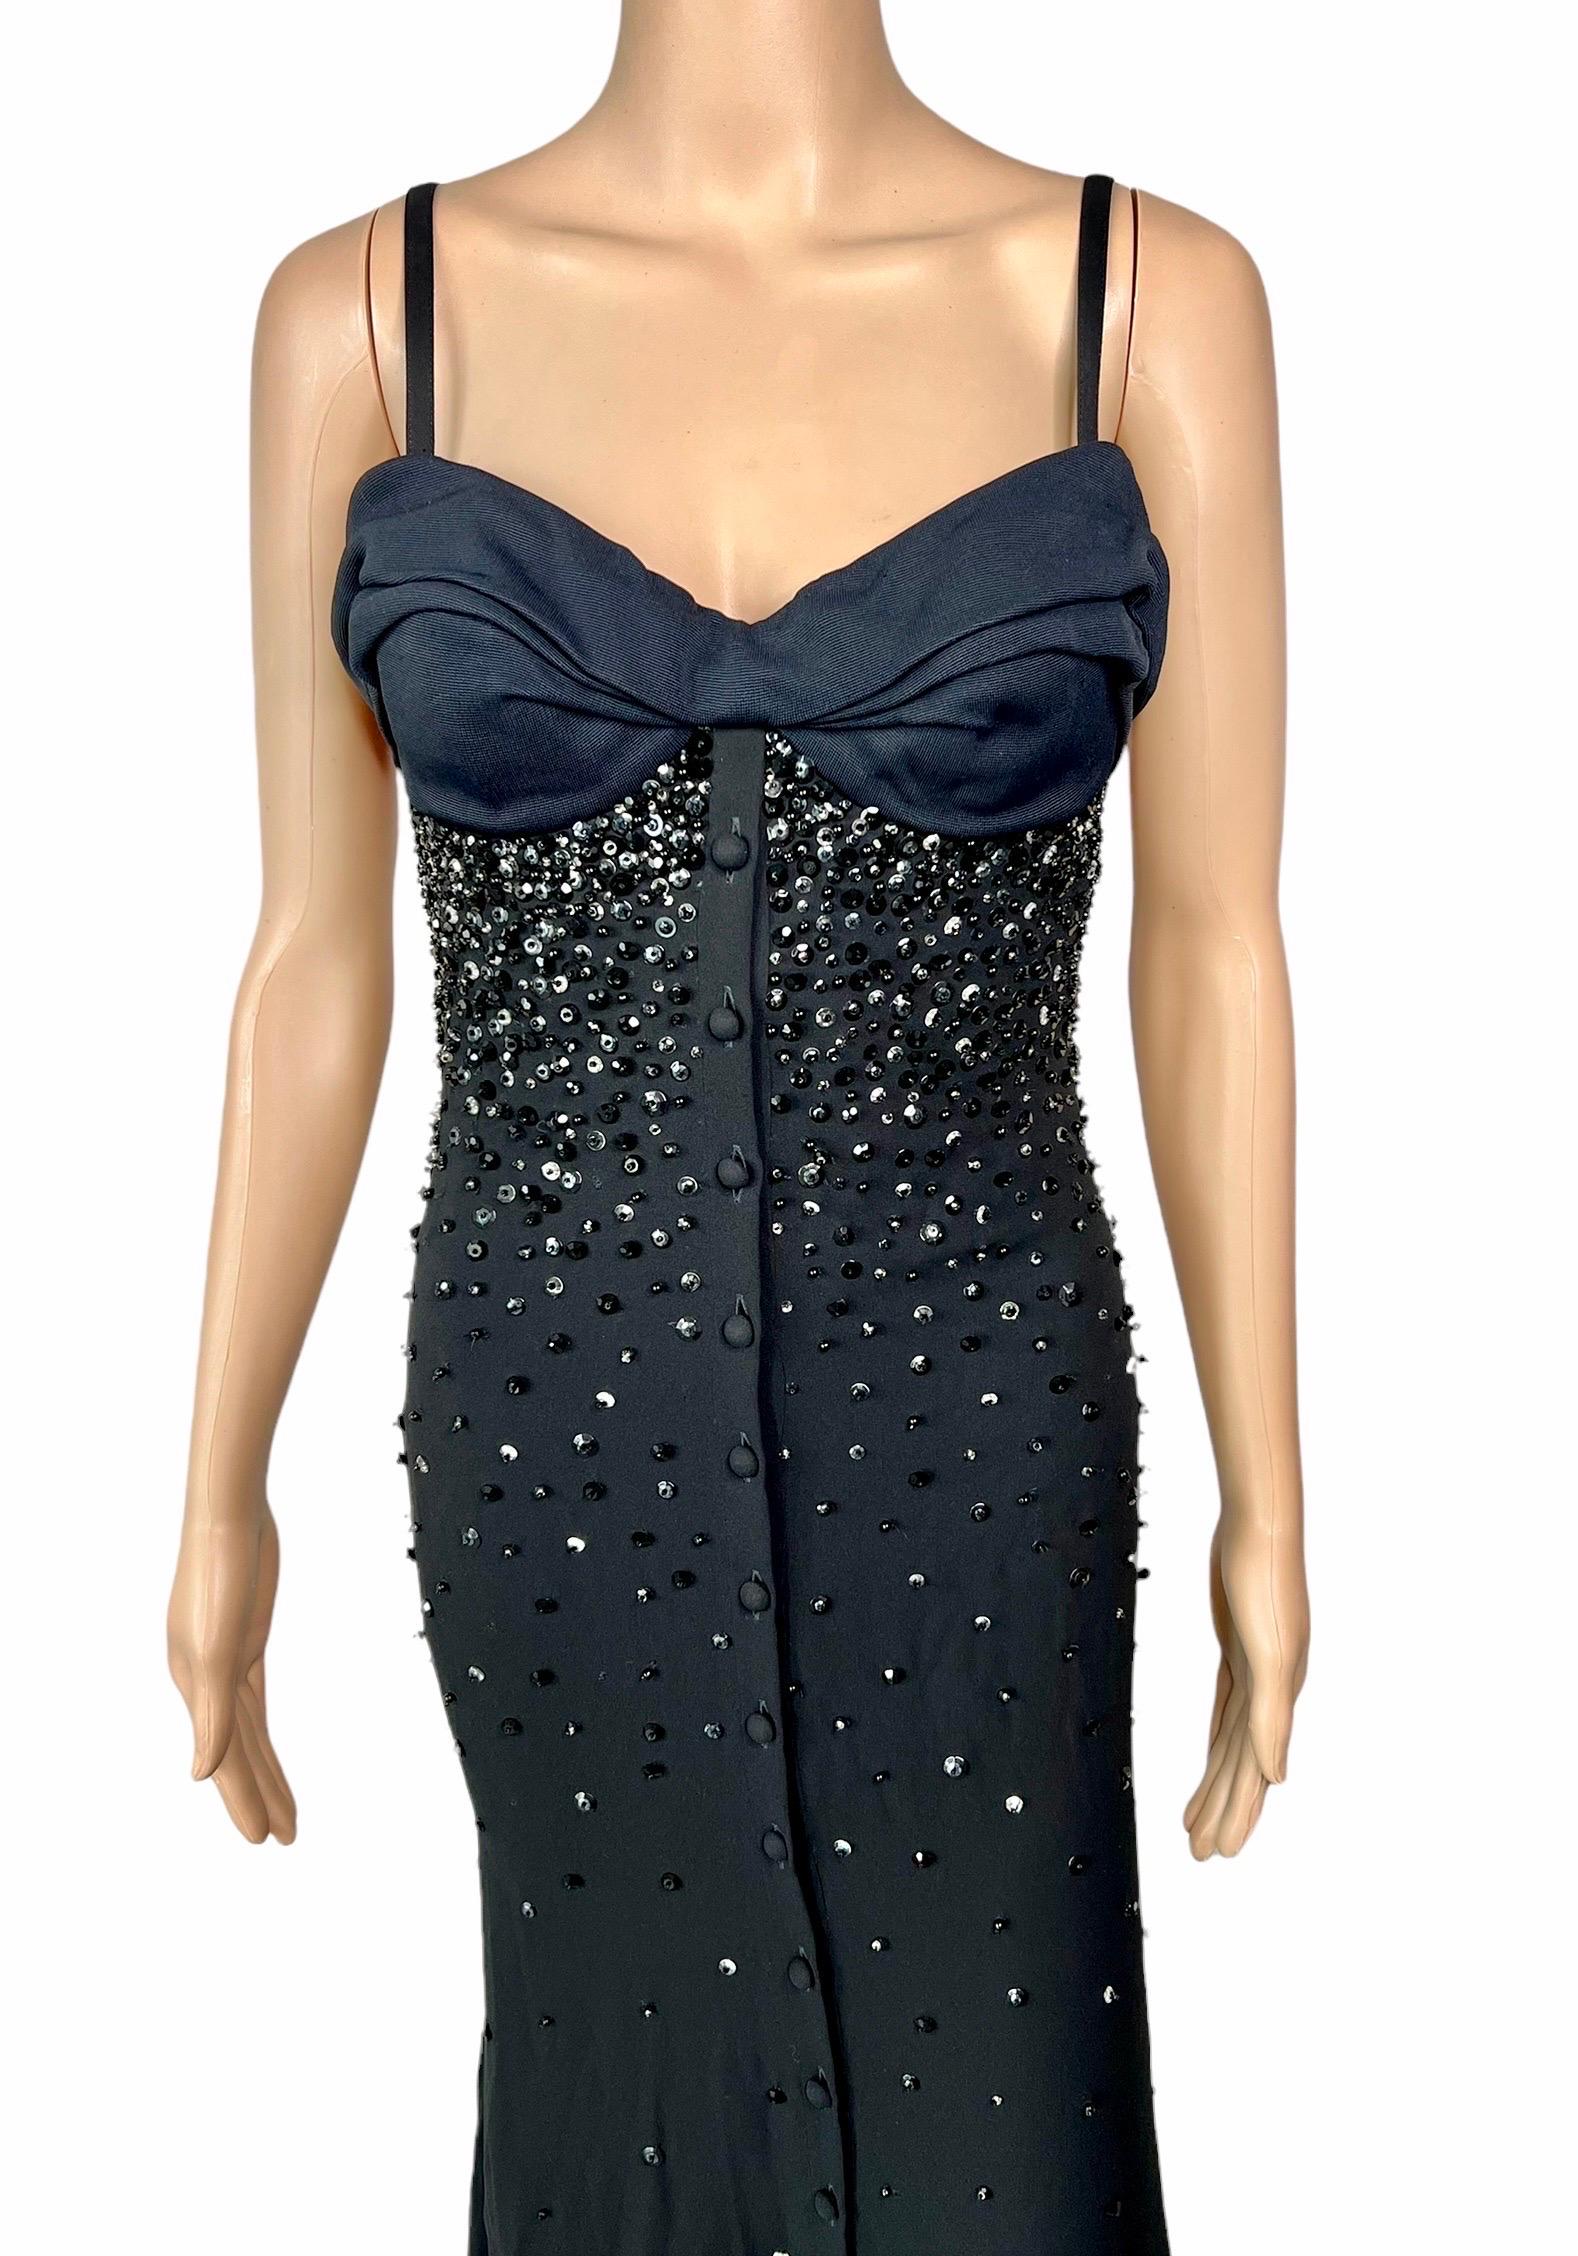 Gianni Versace S/S 1996 Runway Embellished Bustier Black Evening Dress Gown  For Sale 1